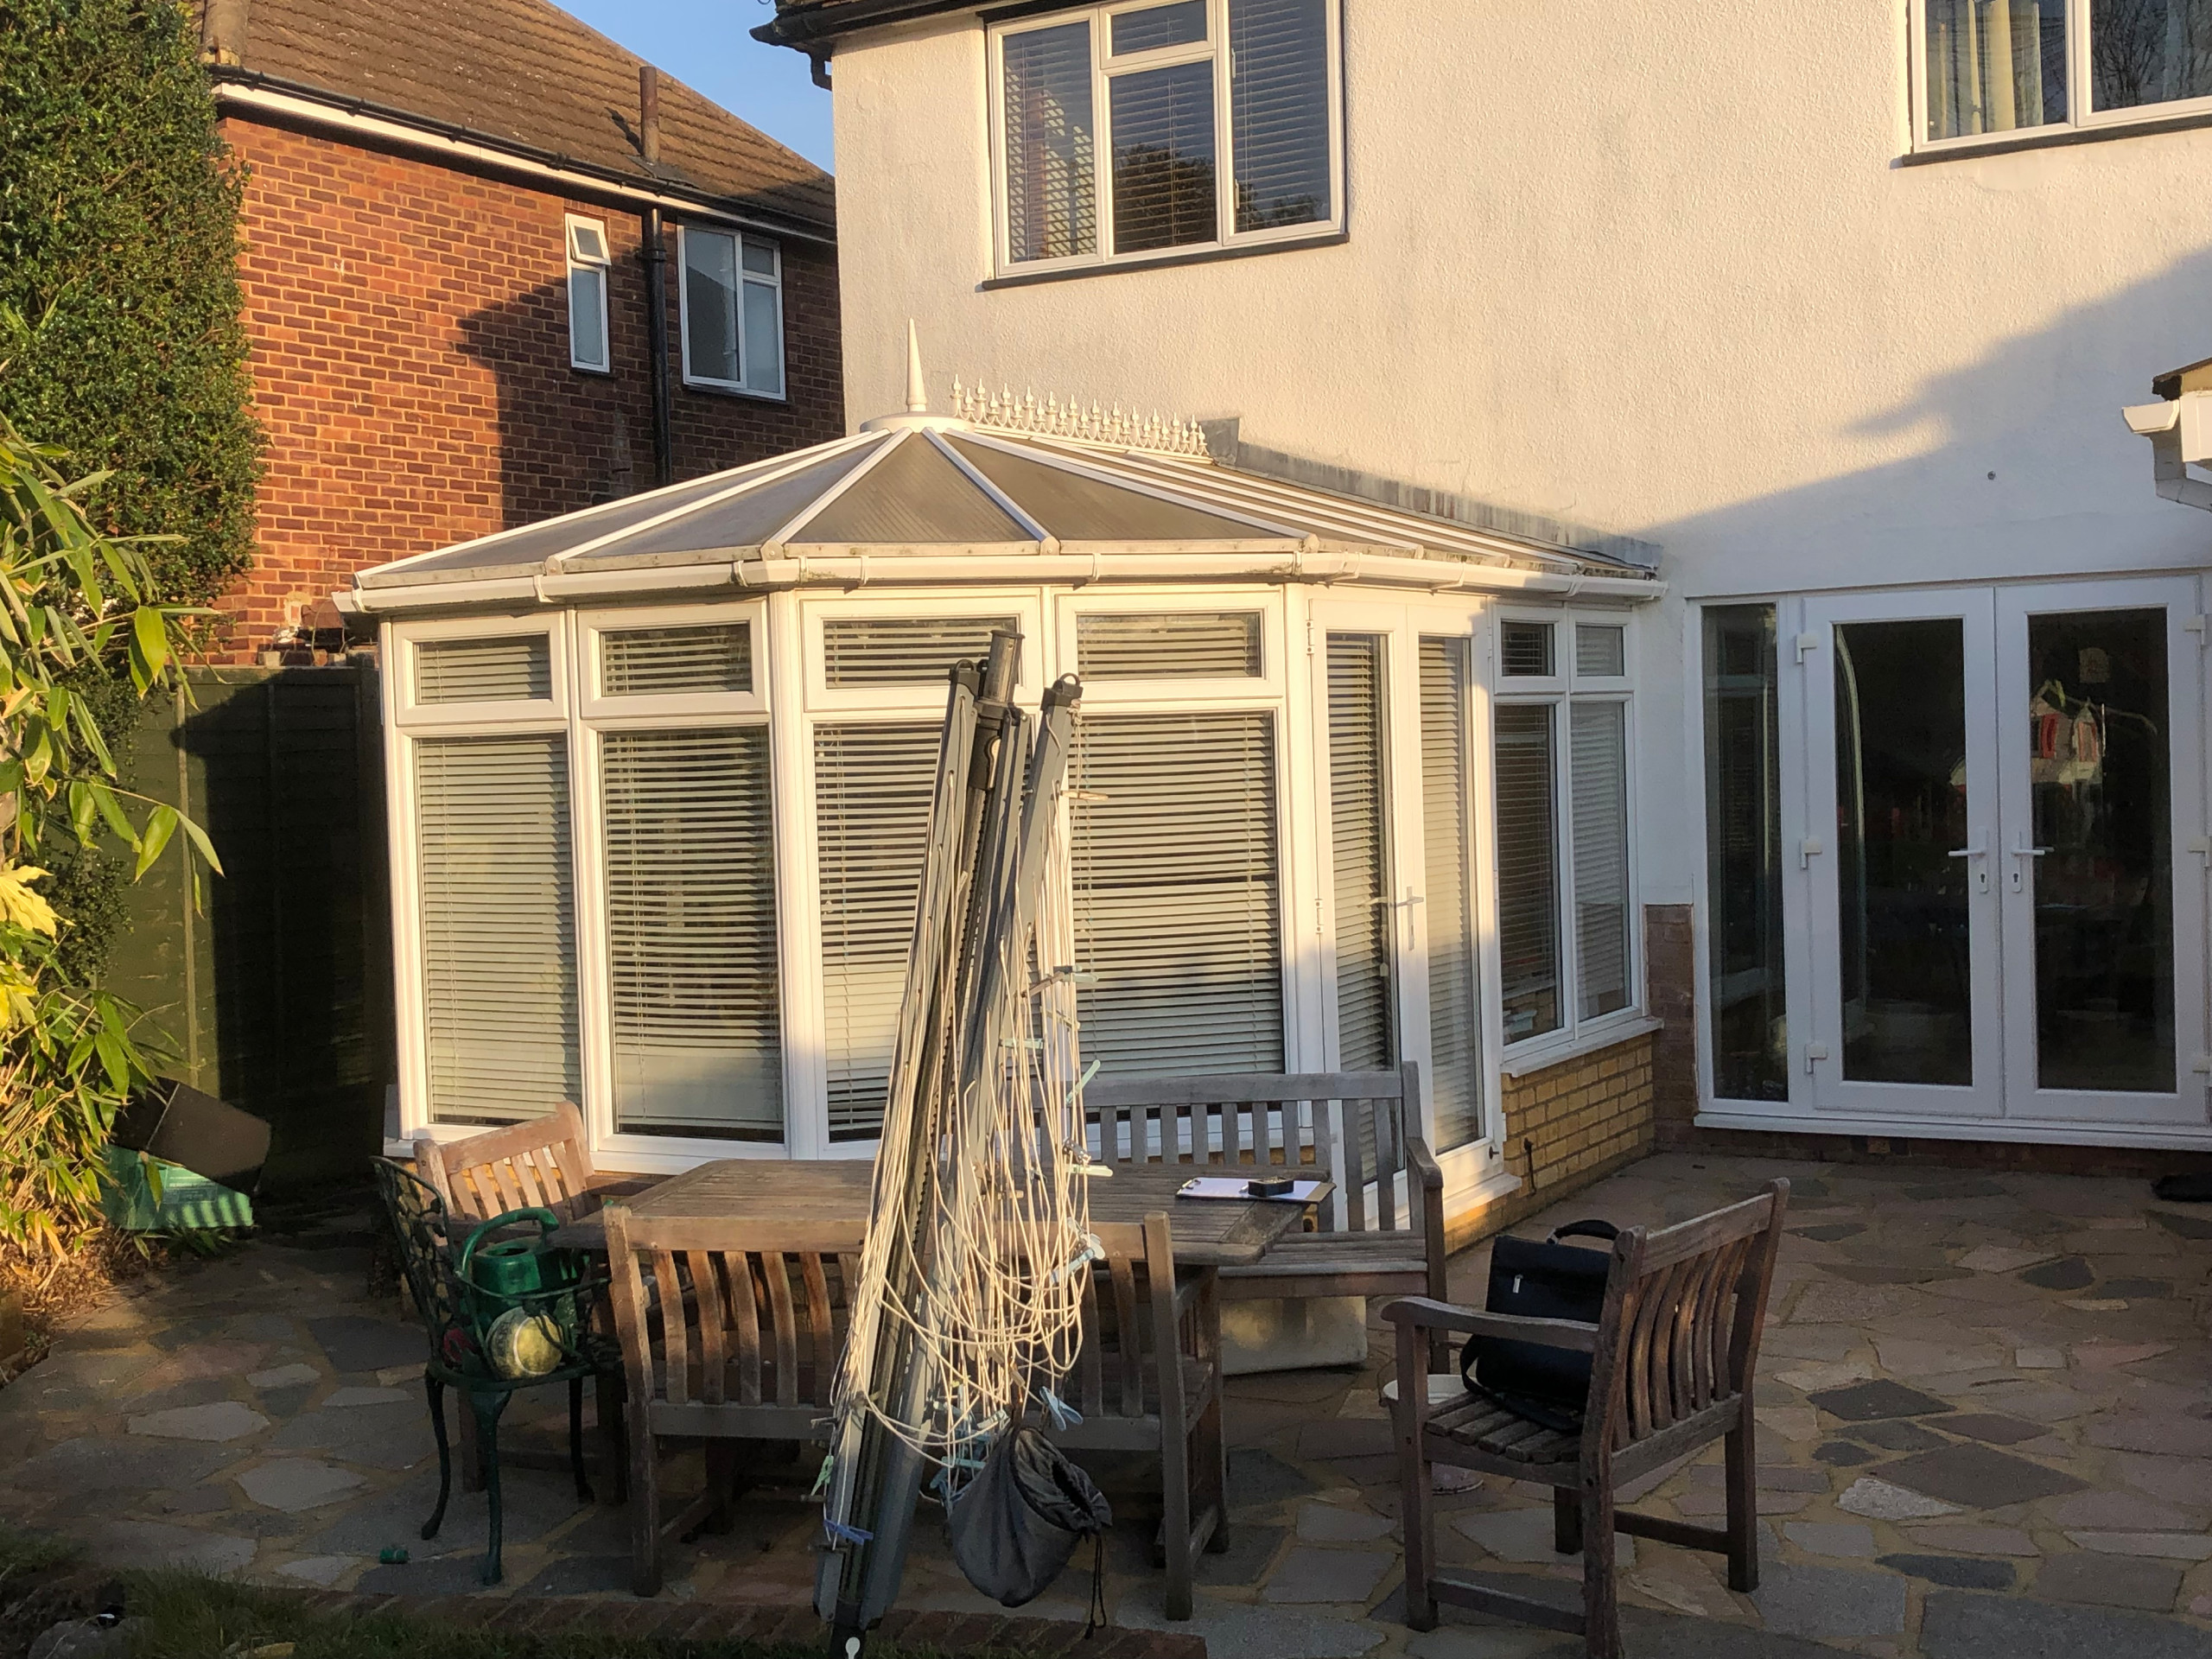 Existing conservatory